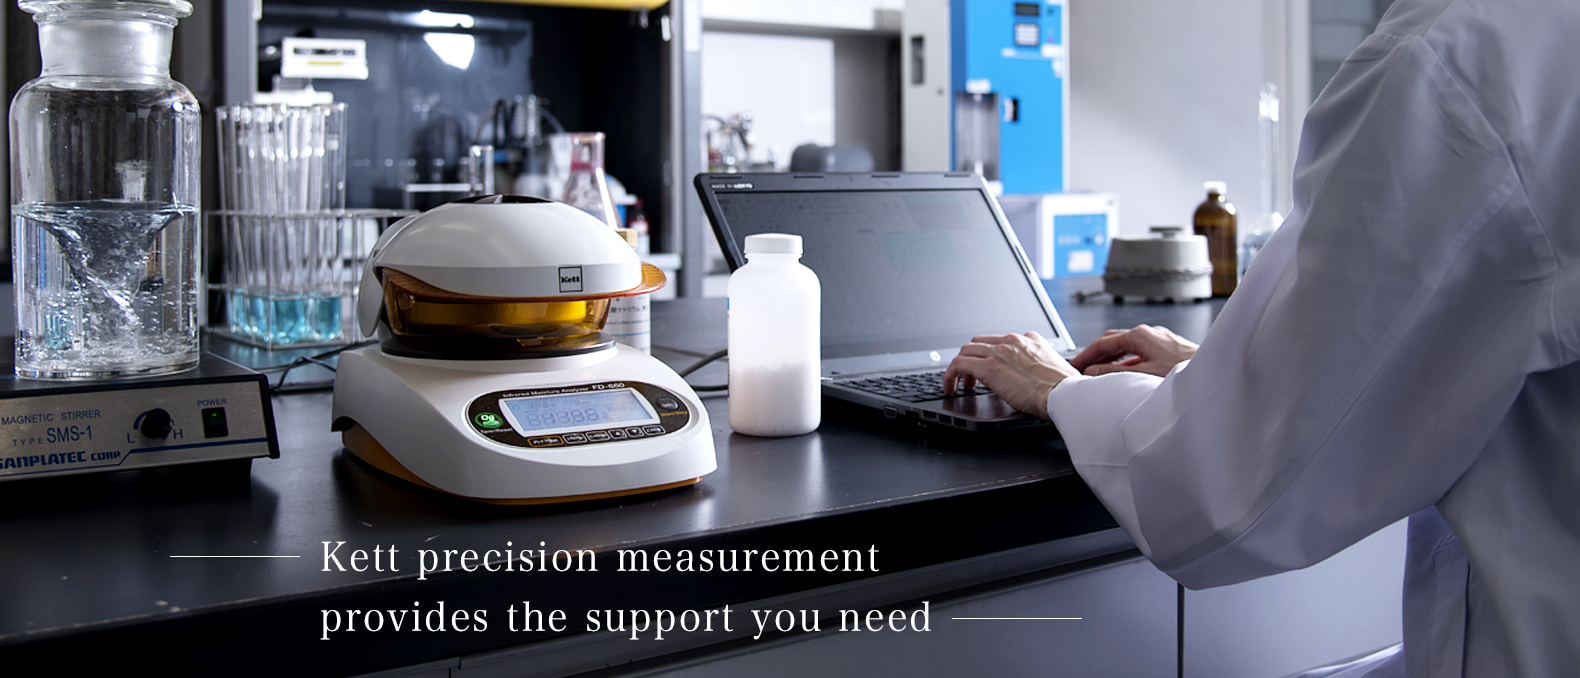 Kett precision measurement provides the support you need.